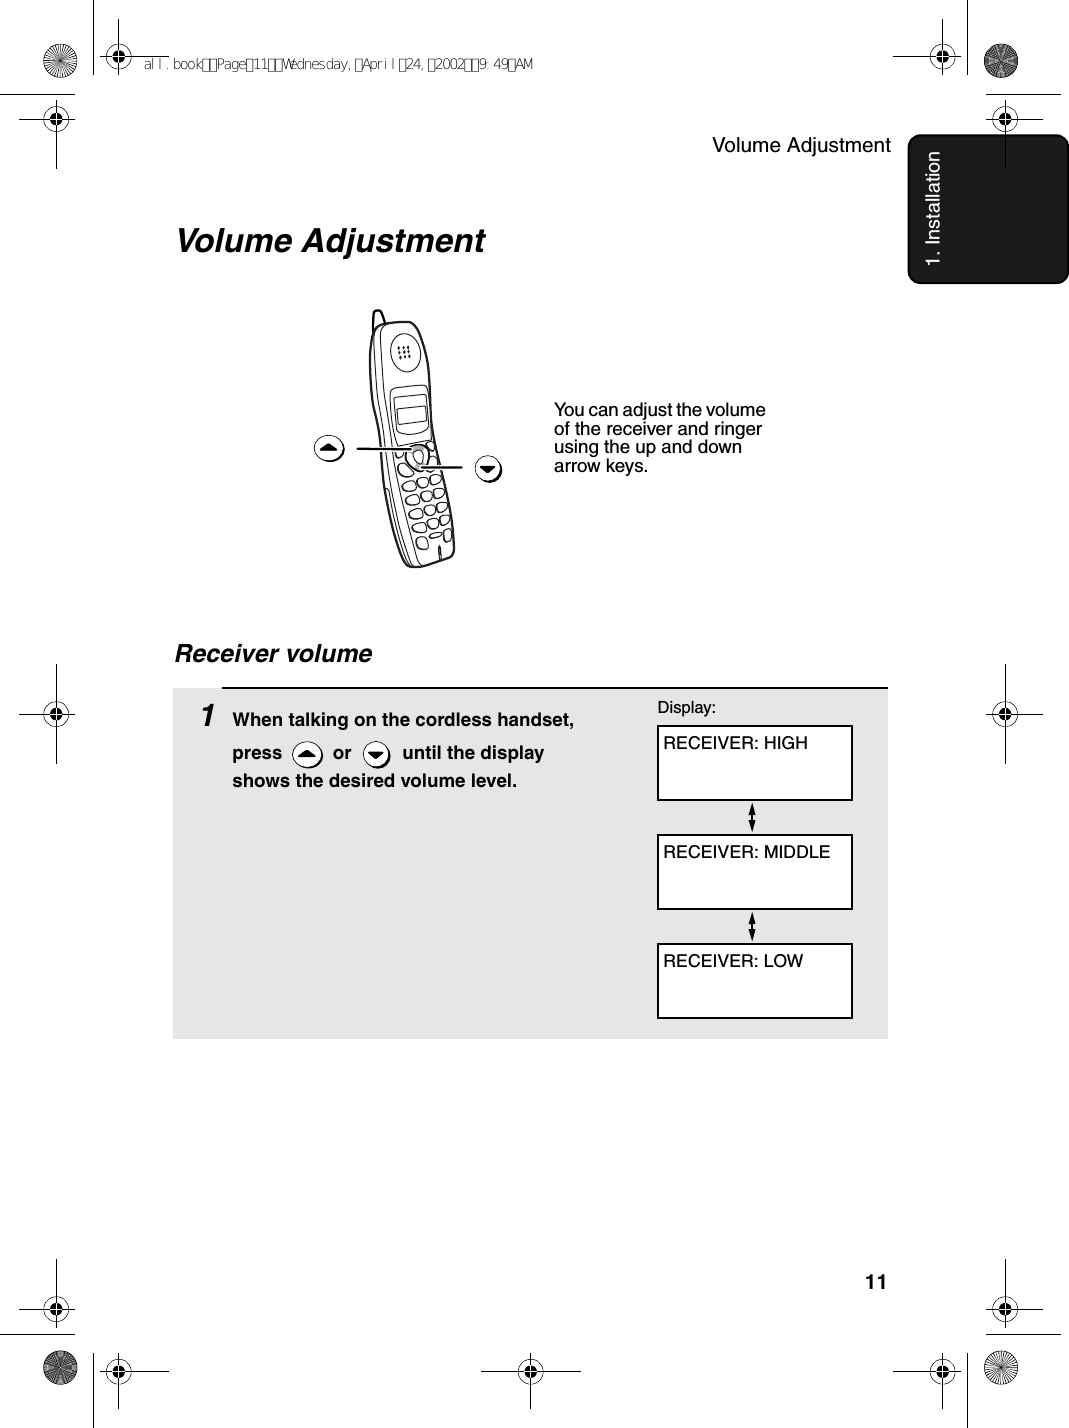 Volume Adjustment111. InstallationVolume Adjustment You can adjust the volume of the receiver and ringer using the up and down arrow keys.1When talking on the cordless handset, press   or   until the display shows the desired volume level.RECEIVER: HIGHDisplay:RECEIVER: MIDDLERECEIVER: LOWReceiver volumeall.bookPage11Wednesday,April24,20029:49AM